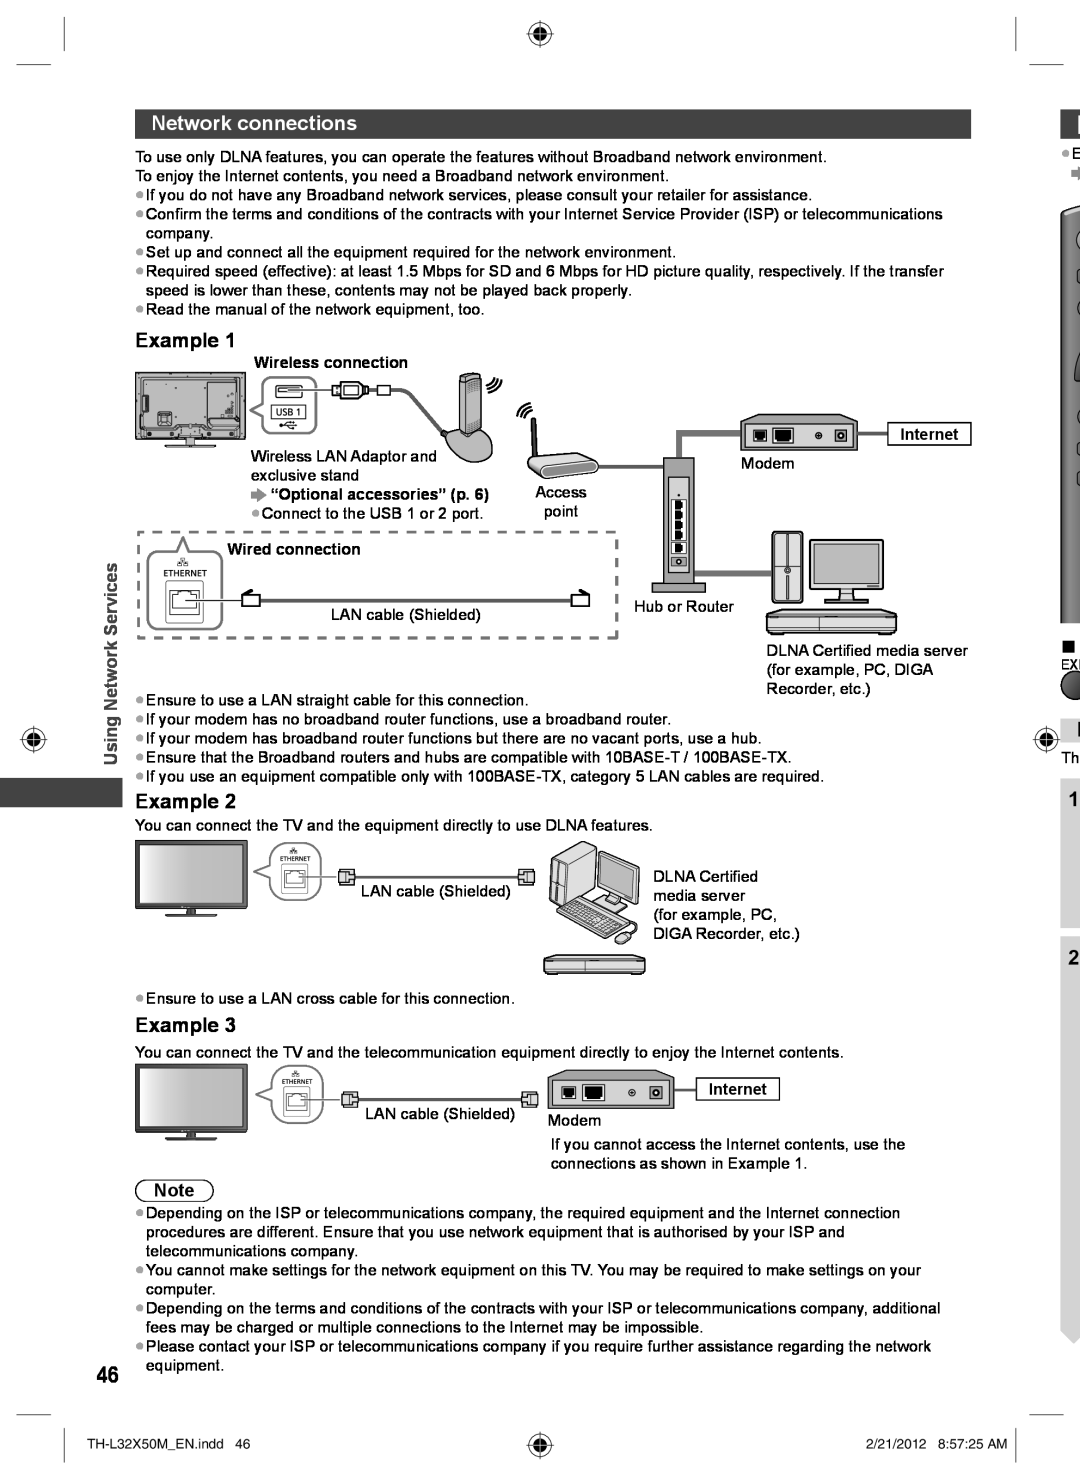 Panasonic TH-L32X50M Network connections, Example, Services, Using, Wireless connection, Internet, Wired connection 